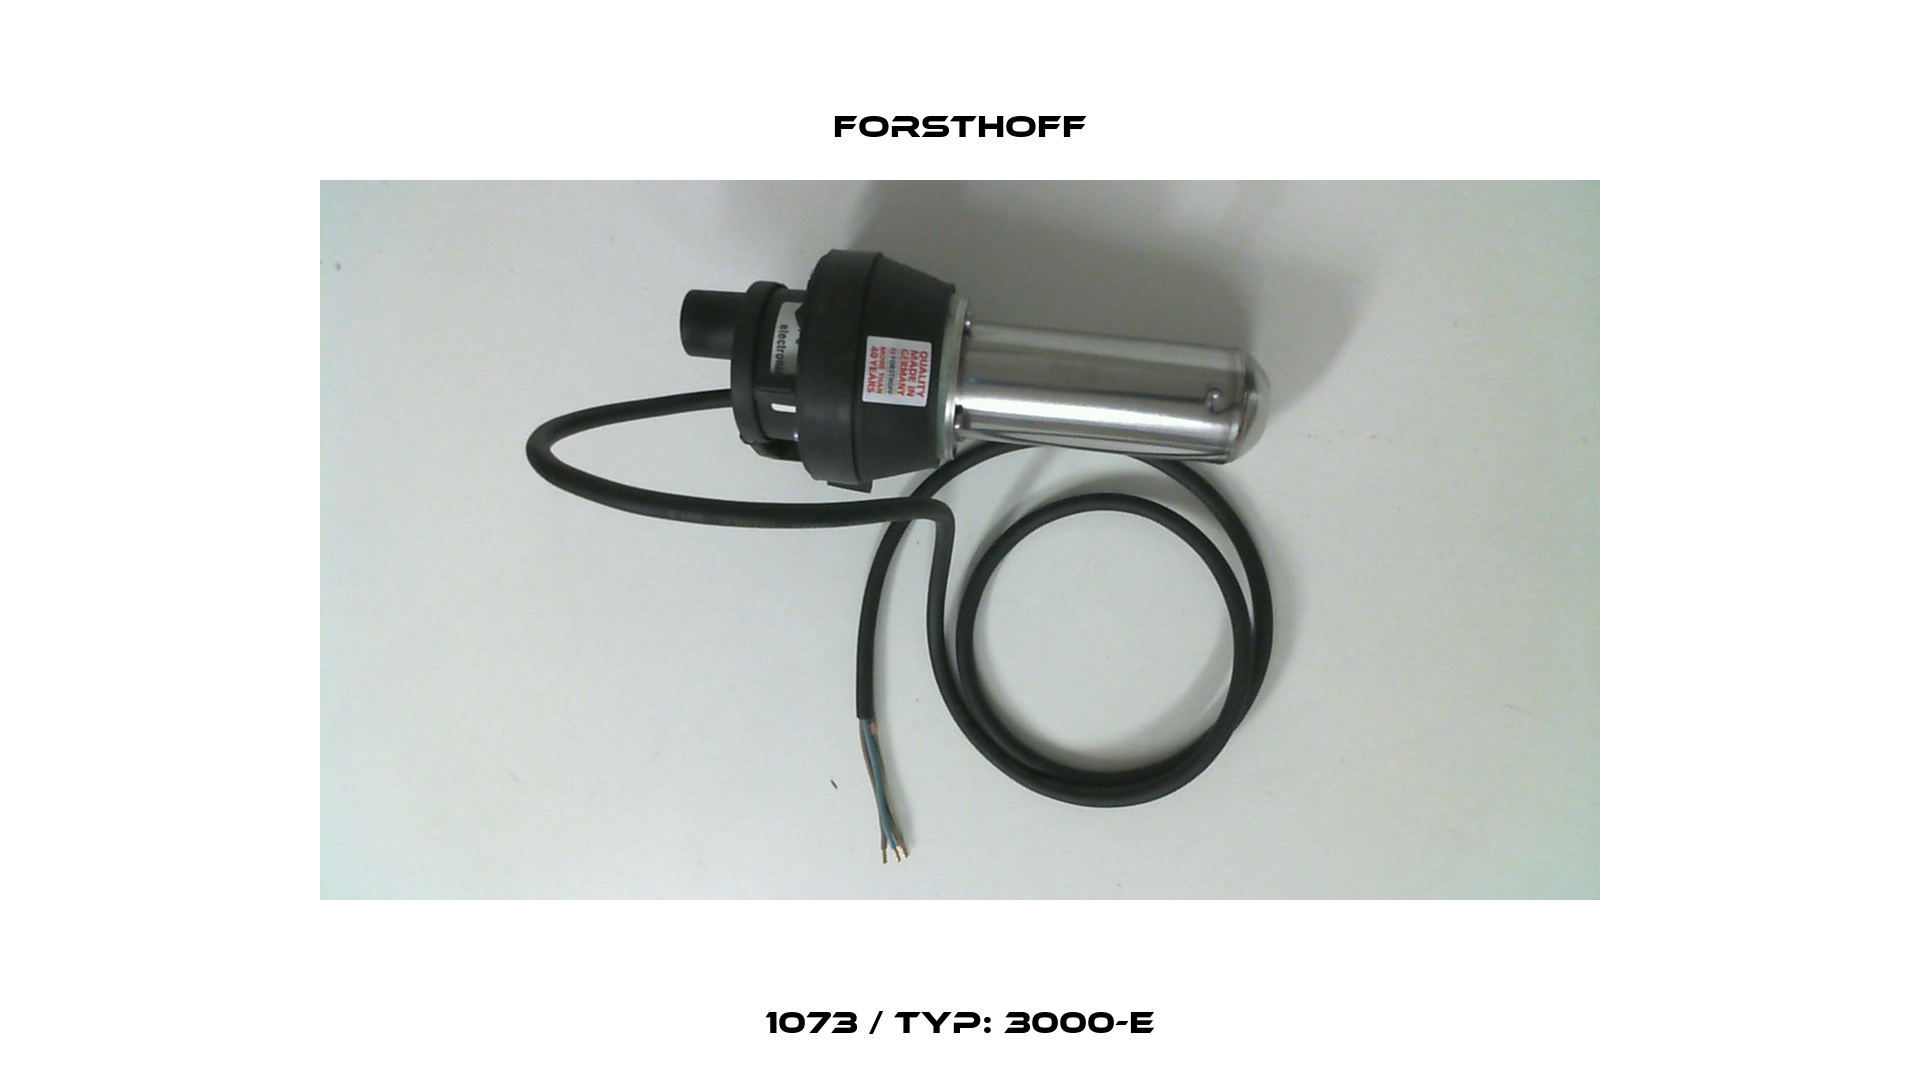 1073 / Typ: 3000-E Forsthoff